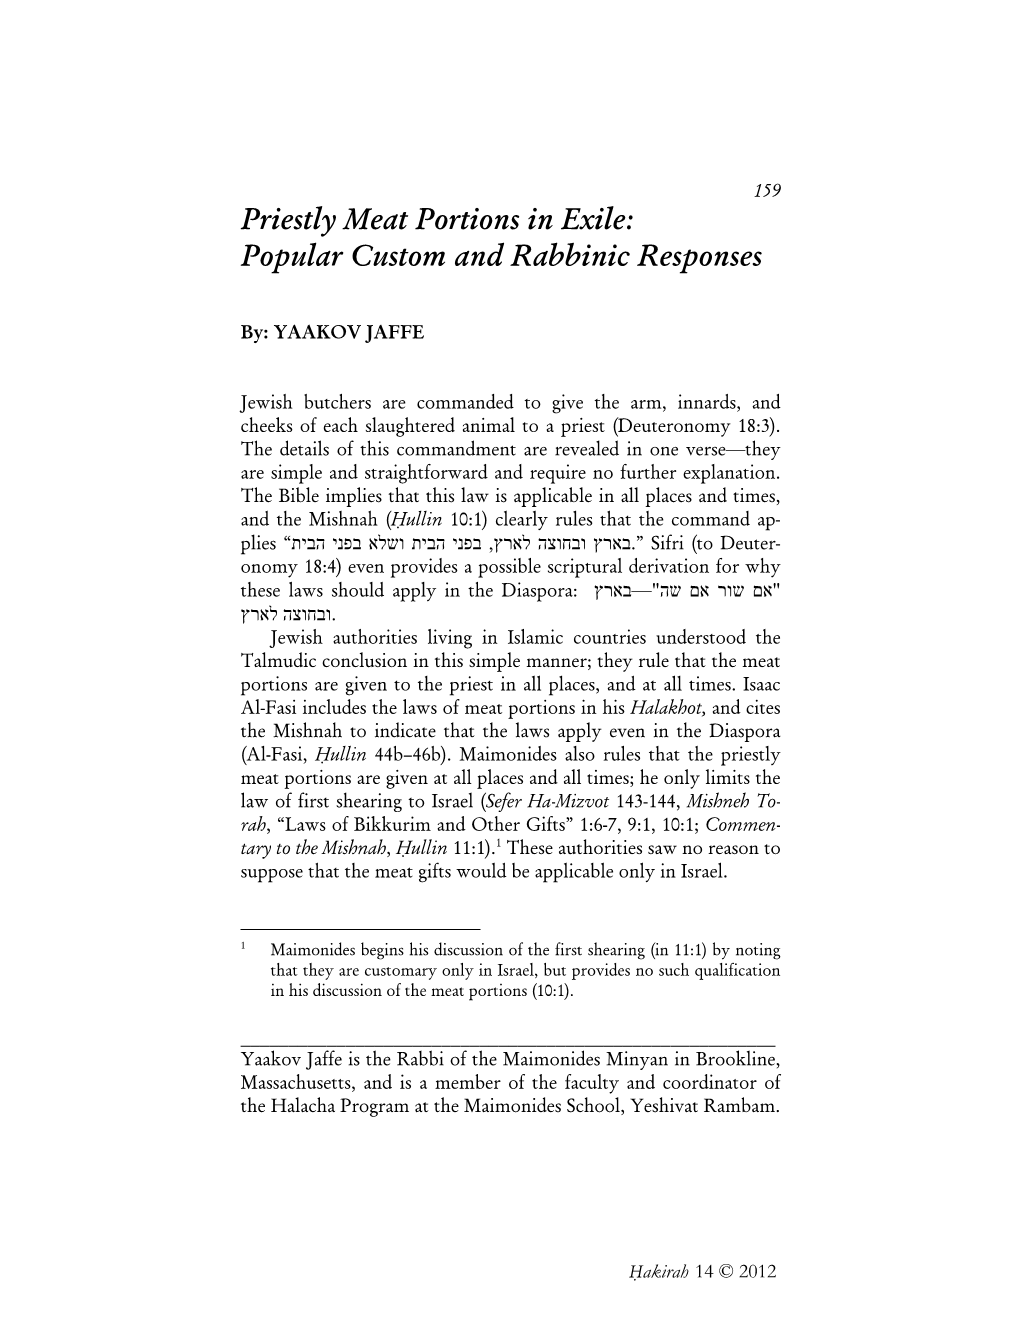 Priestly Meat Portions in Exile: Popular Custom and Rabbinic Responses